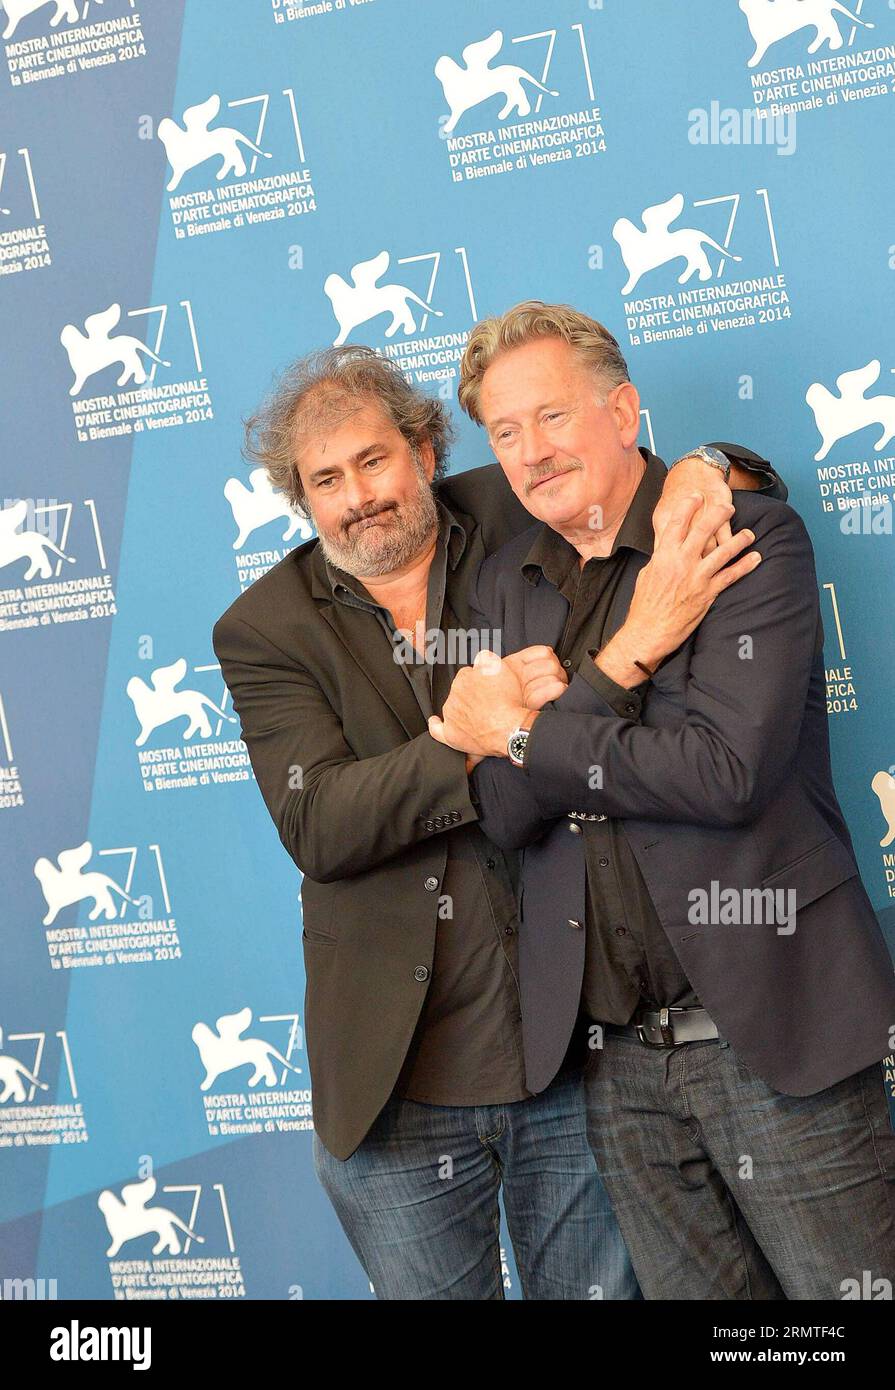 (140901) -- VENICE, Sept. 1, 2014 -- Directors Gustave Kervern (L) and Benoit Del¨¦pine pose during the photo call for Near Death Experience which is selected for the horizons competition during the 71st Venice Film Festival, in Lido of Venice, Italy on Sept. 1, 2014. ) ITALY-VENICE-FILM FESTIVAL-NEAR DEATH EXPERIENCE-PHOTO CALL LiuxLihang PUBLICATIONxNOTxINxCHN   Venice Sept 1 2014 Directors Gustave Kervern l and Benoit  Pose during The Photo Call for Near Death Experience Which IS Selected for The HORIZONS Competition during The 71st Venice Film Festival in Lido of Venice Italy ON Sept 1 201 Stock Photo